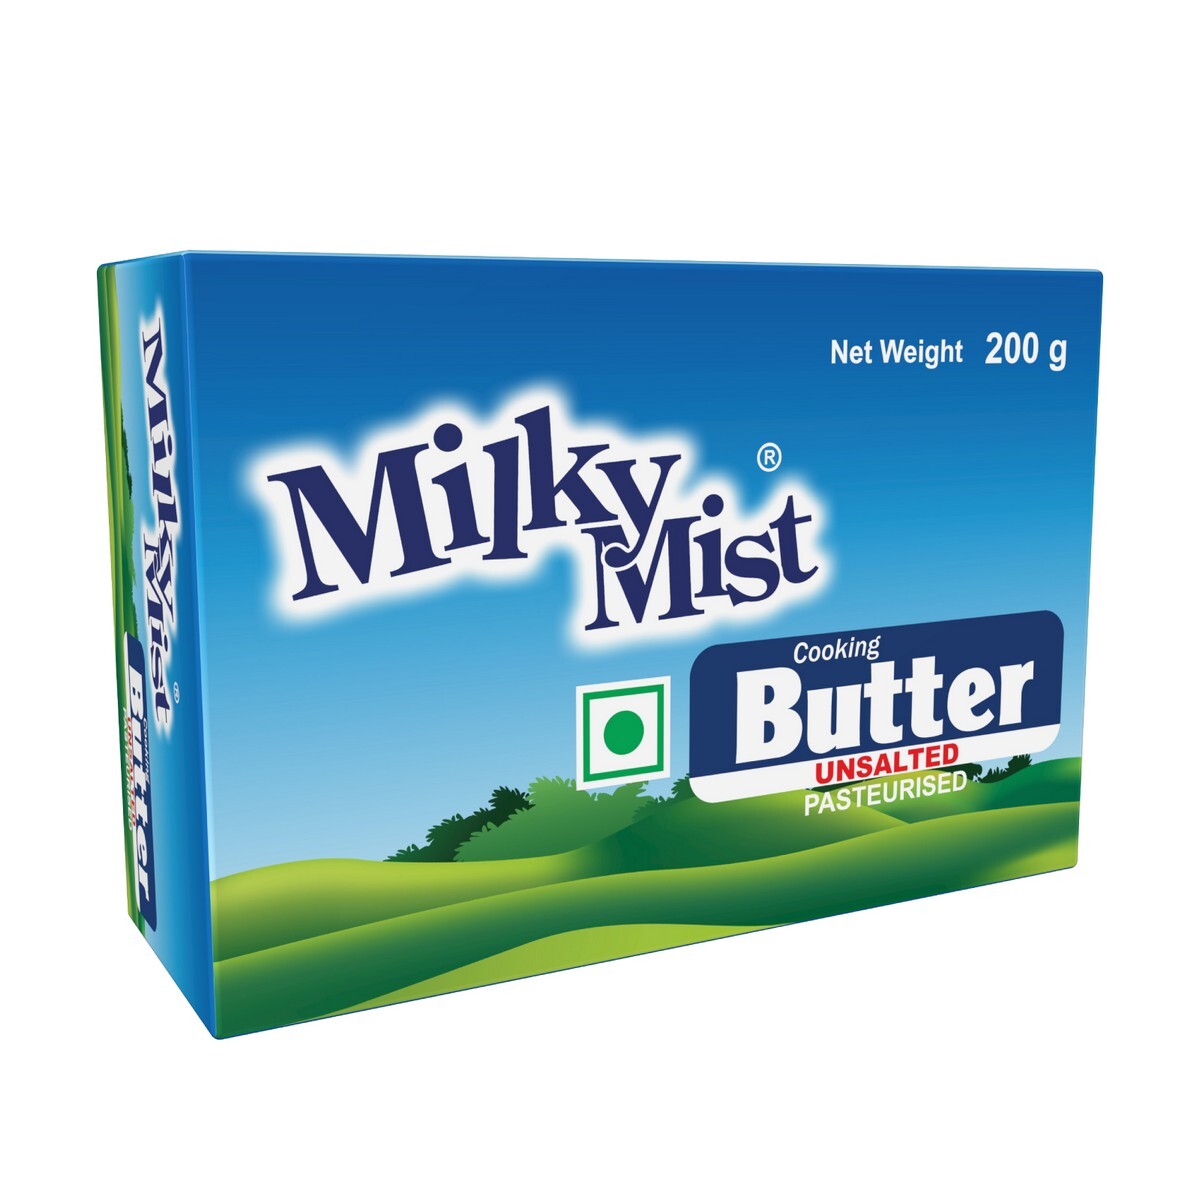 Milky Mist Cooking Butter Unsalted 200g